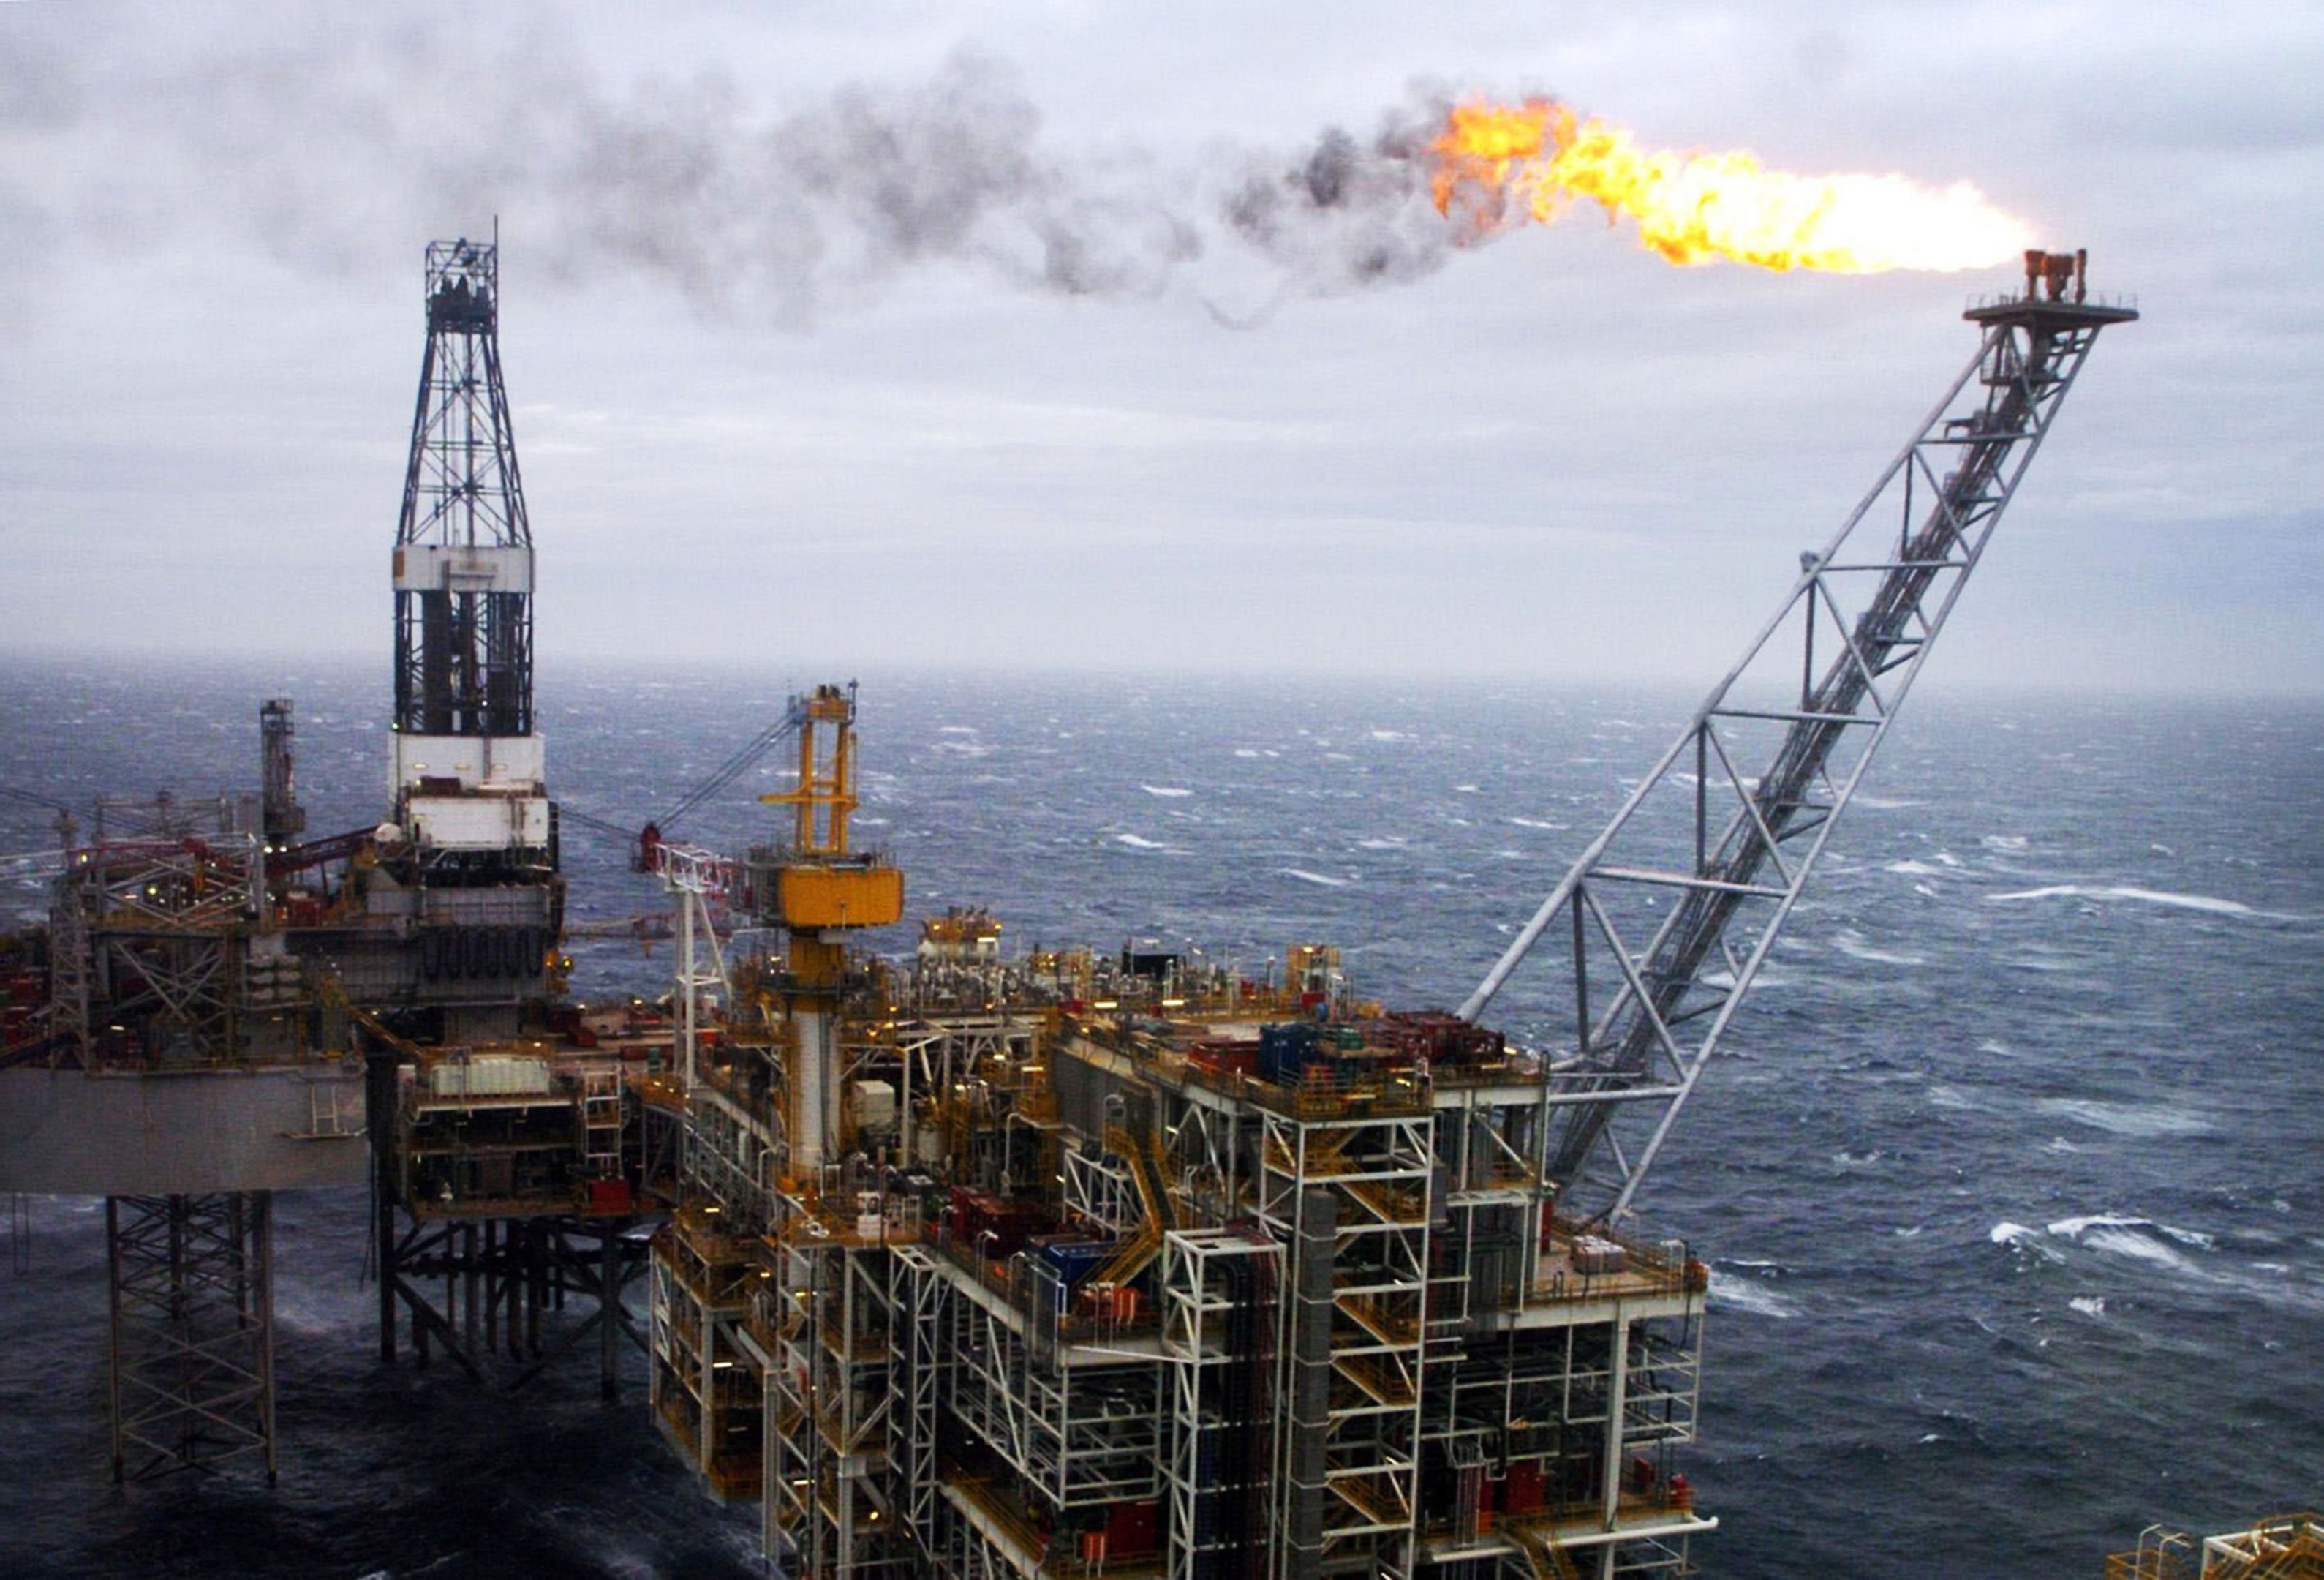 Longterm turmoil in the oil industry has heavily impacted Scotland's economy